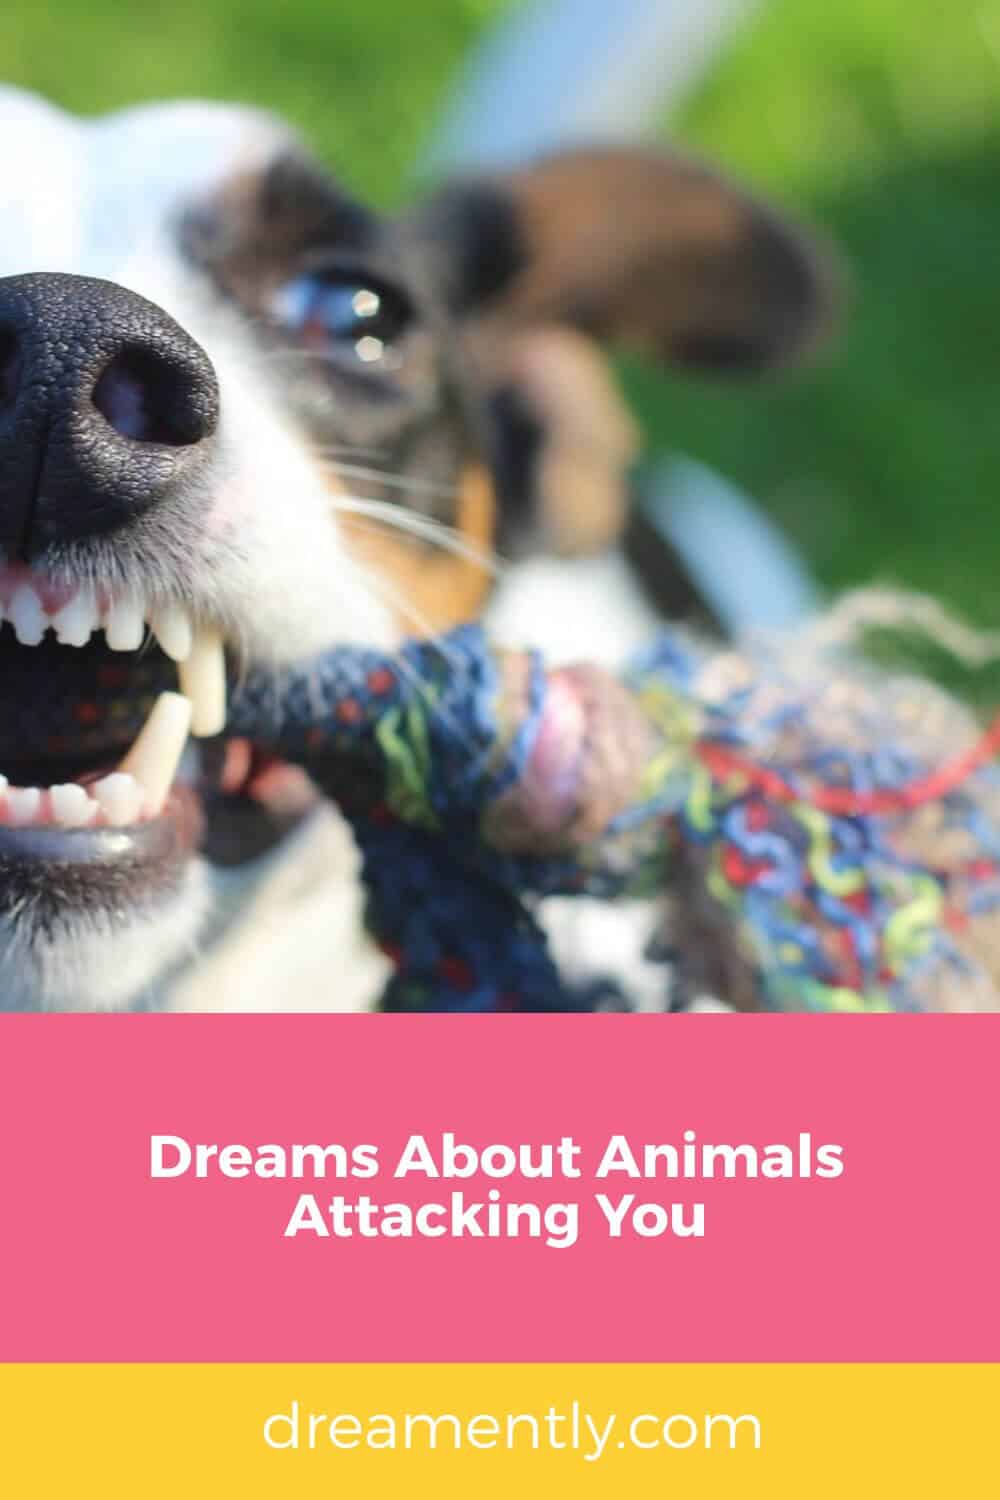 Dreams About Animals Attacking You (2)